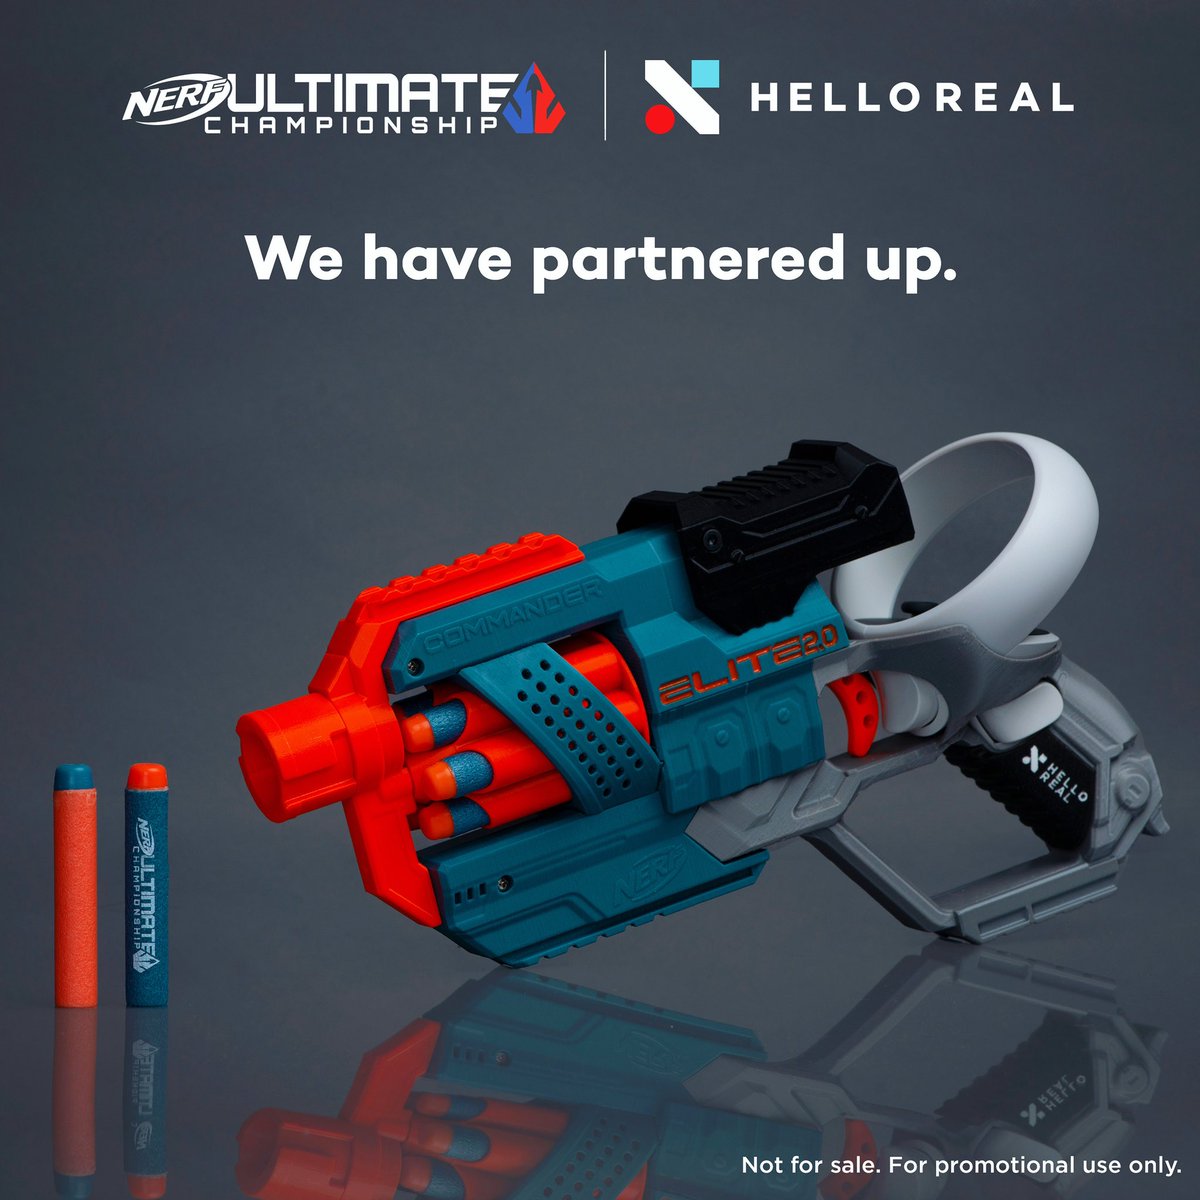 SURPRISE! We are incredibly proud to announce that we have teamed up with @NerfVR and crafted a ✨ limited-edition NERF Elite 2.0 Commander VR attachment ✨to celebrate the launch of NERF Ultimate Championship, coming to Meta Quest 2 on August 25th.  🏆🥇GIVEAWAY info 👇🏻👇🏻